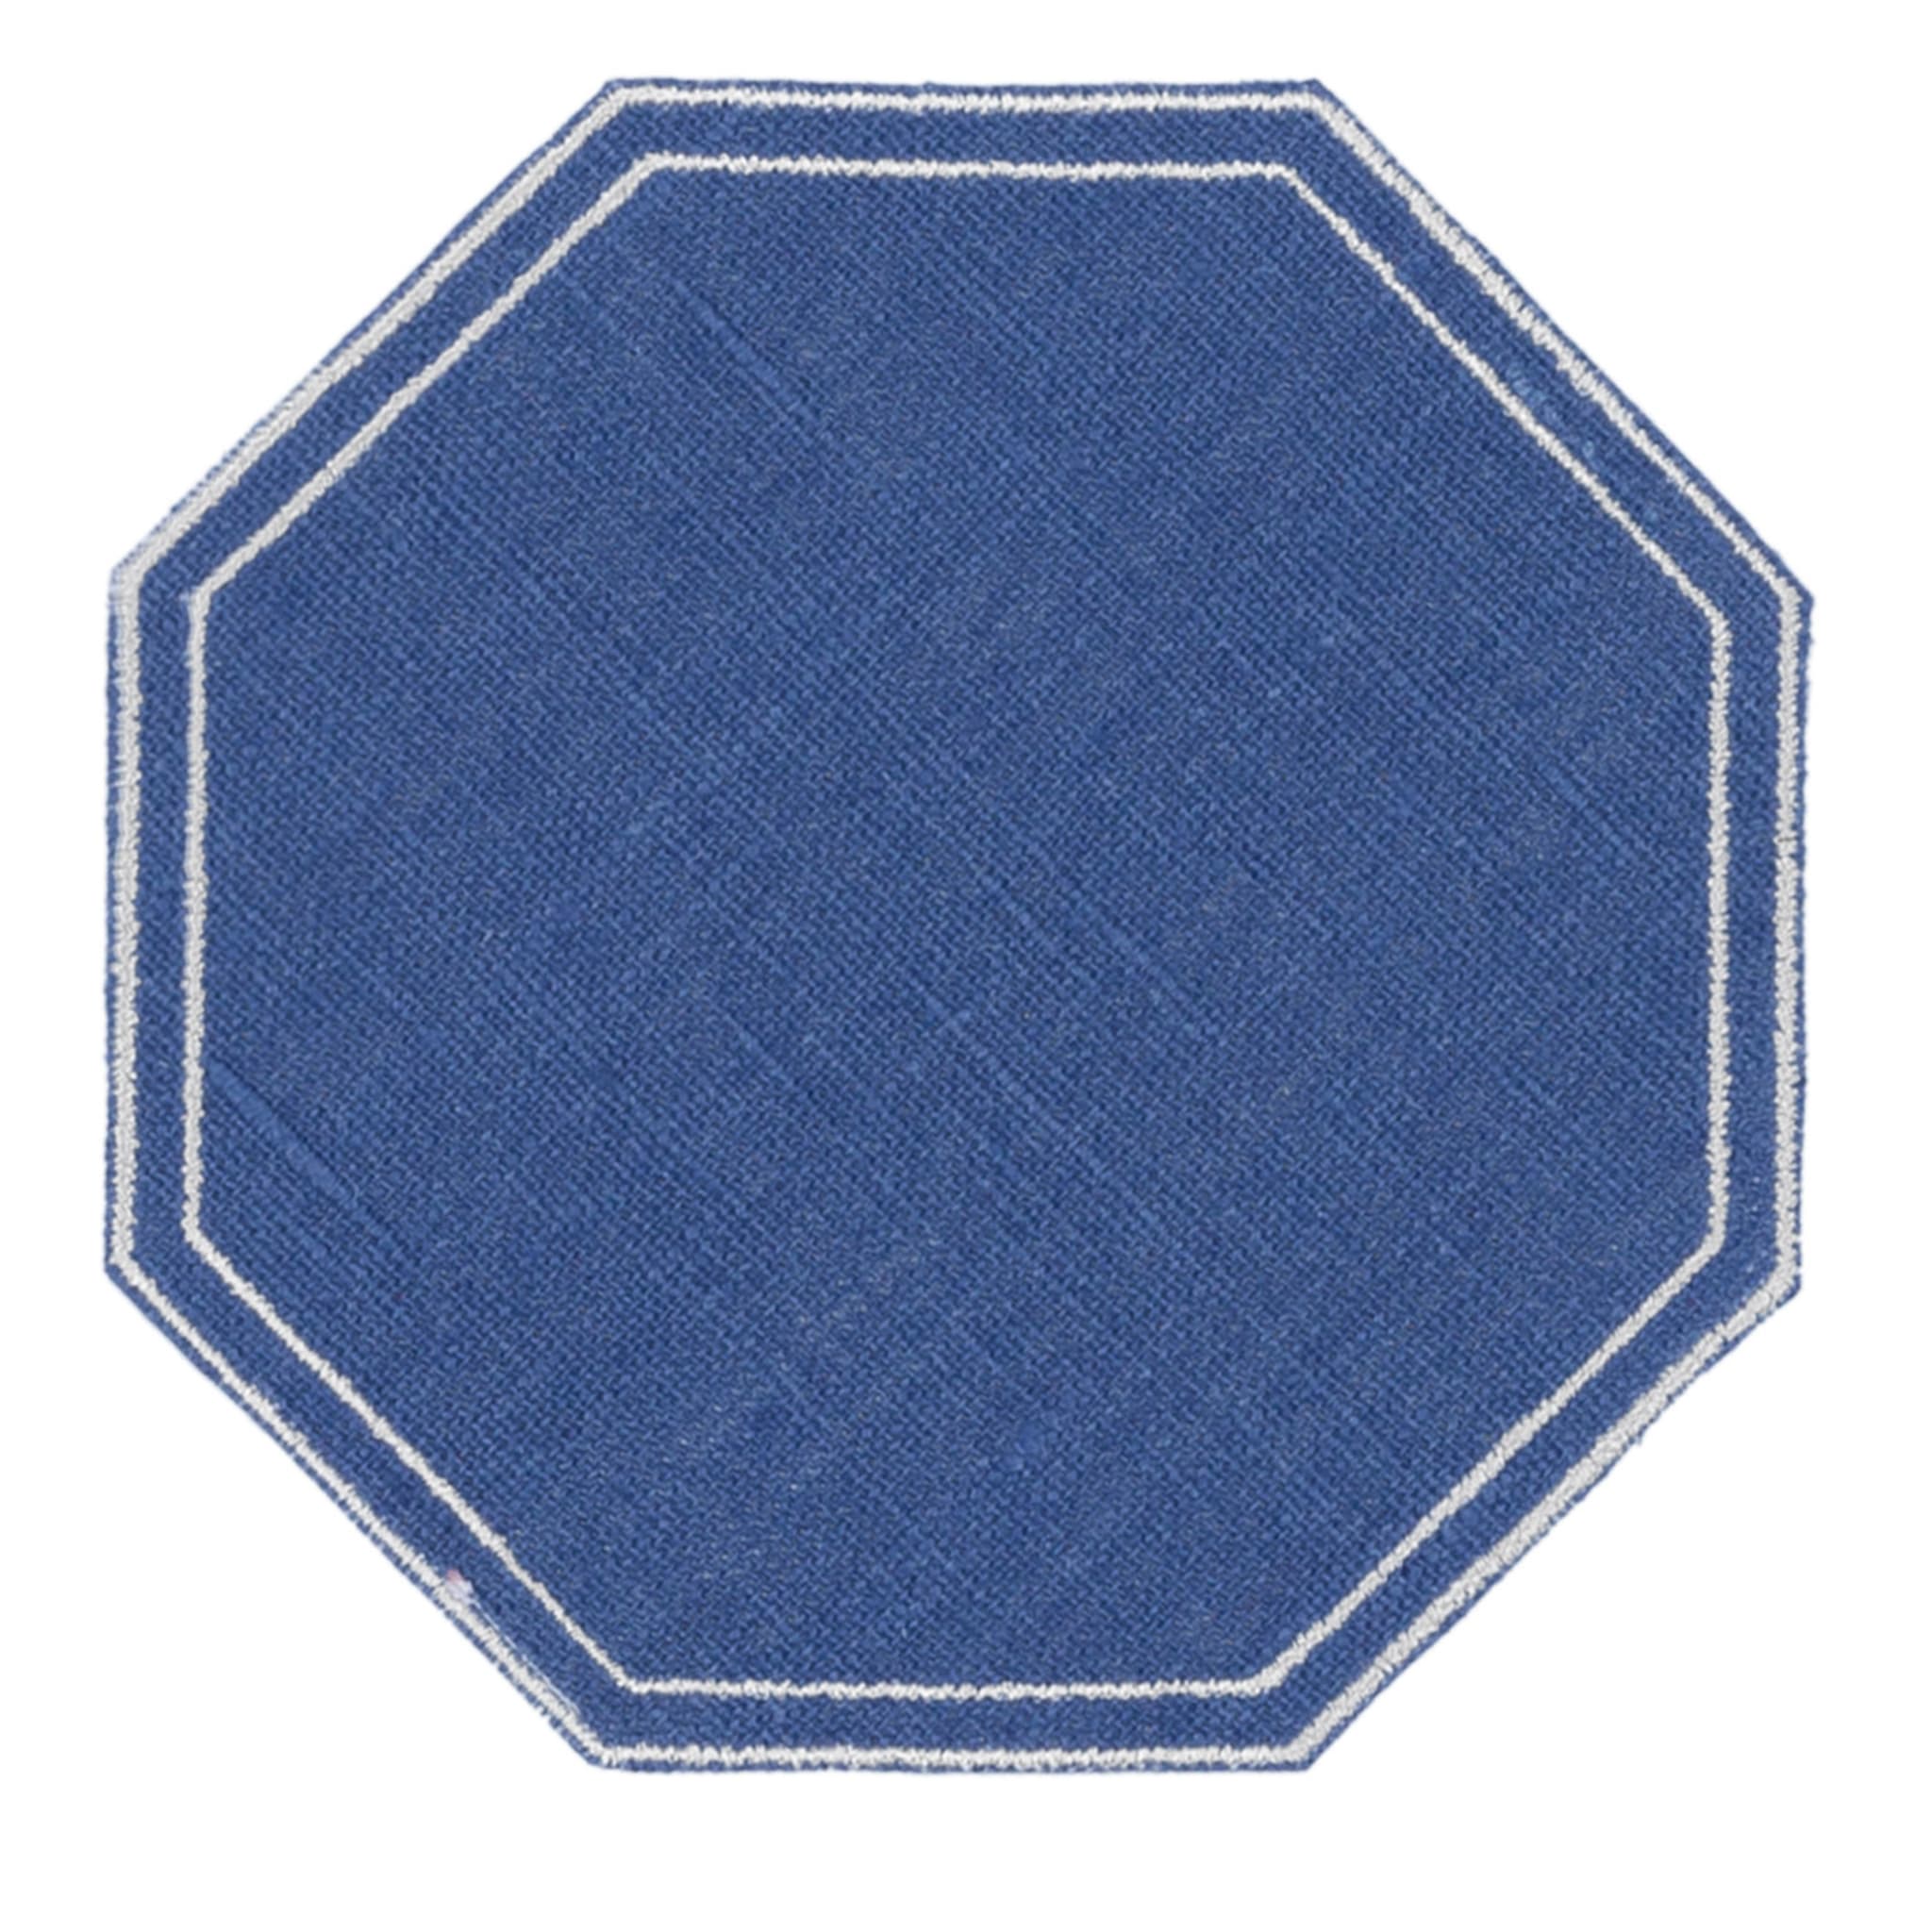 Set of 1 placemat with 1 napkin and 1 coaster - Octagon - Alternative view 2